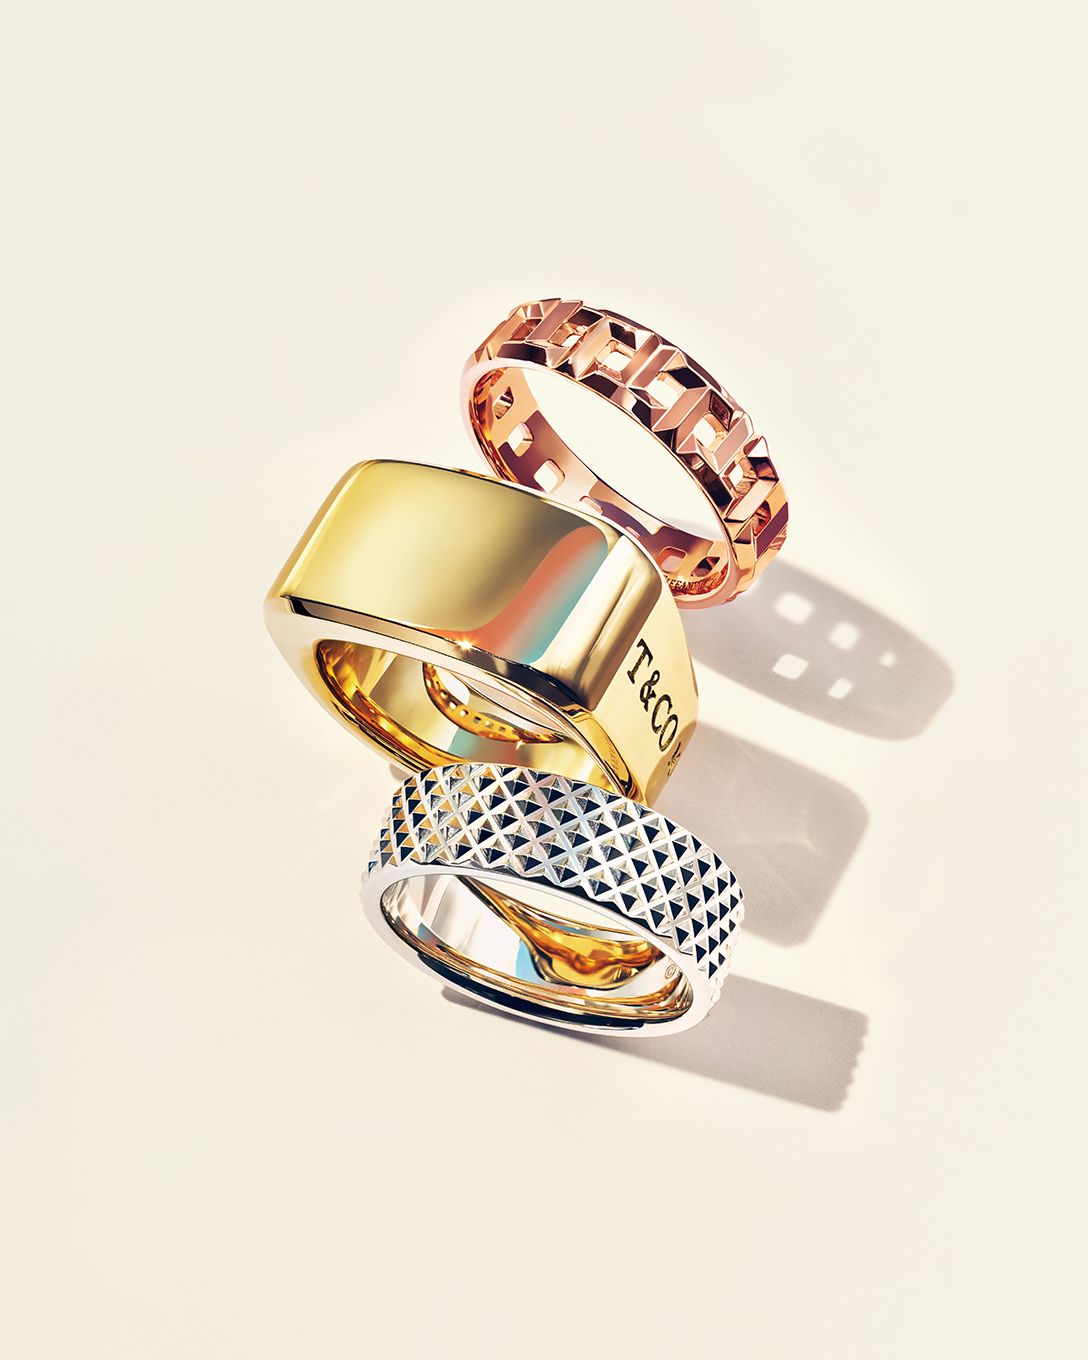 Tiffany Men's Jewelry & Accessory Collection